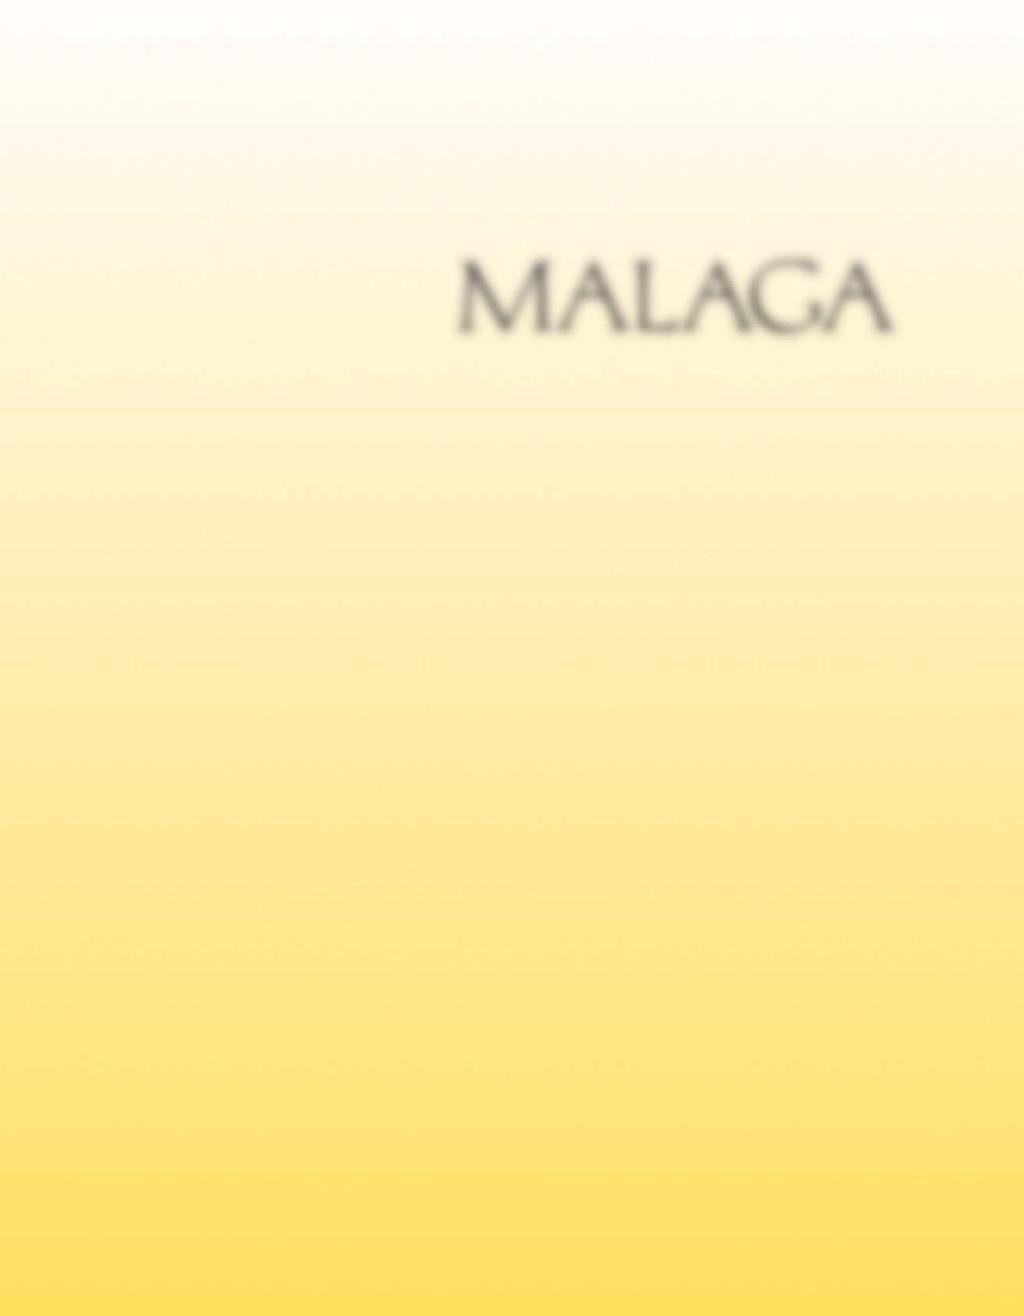 MALAGA Elegance and strength Malaga is a retractable patio awning